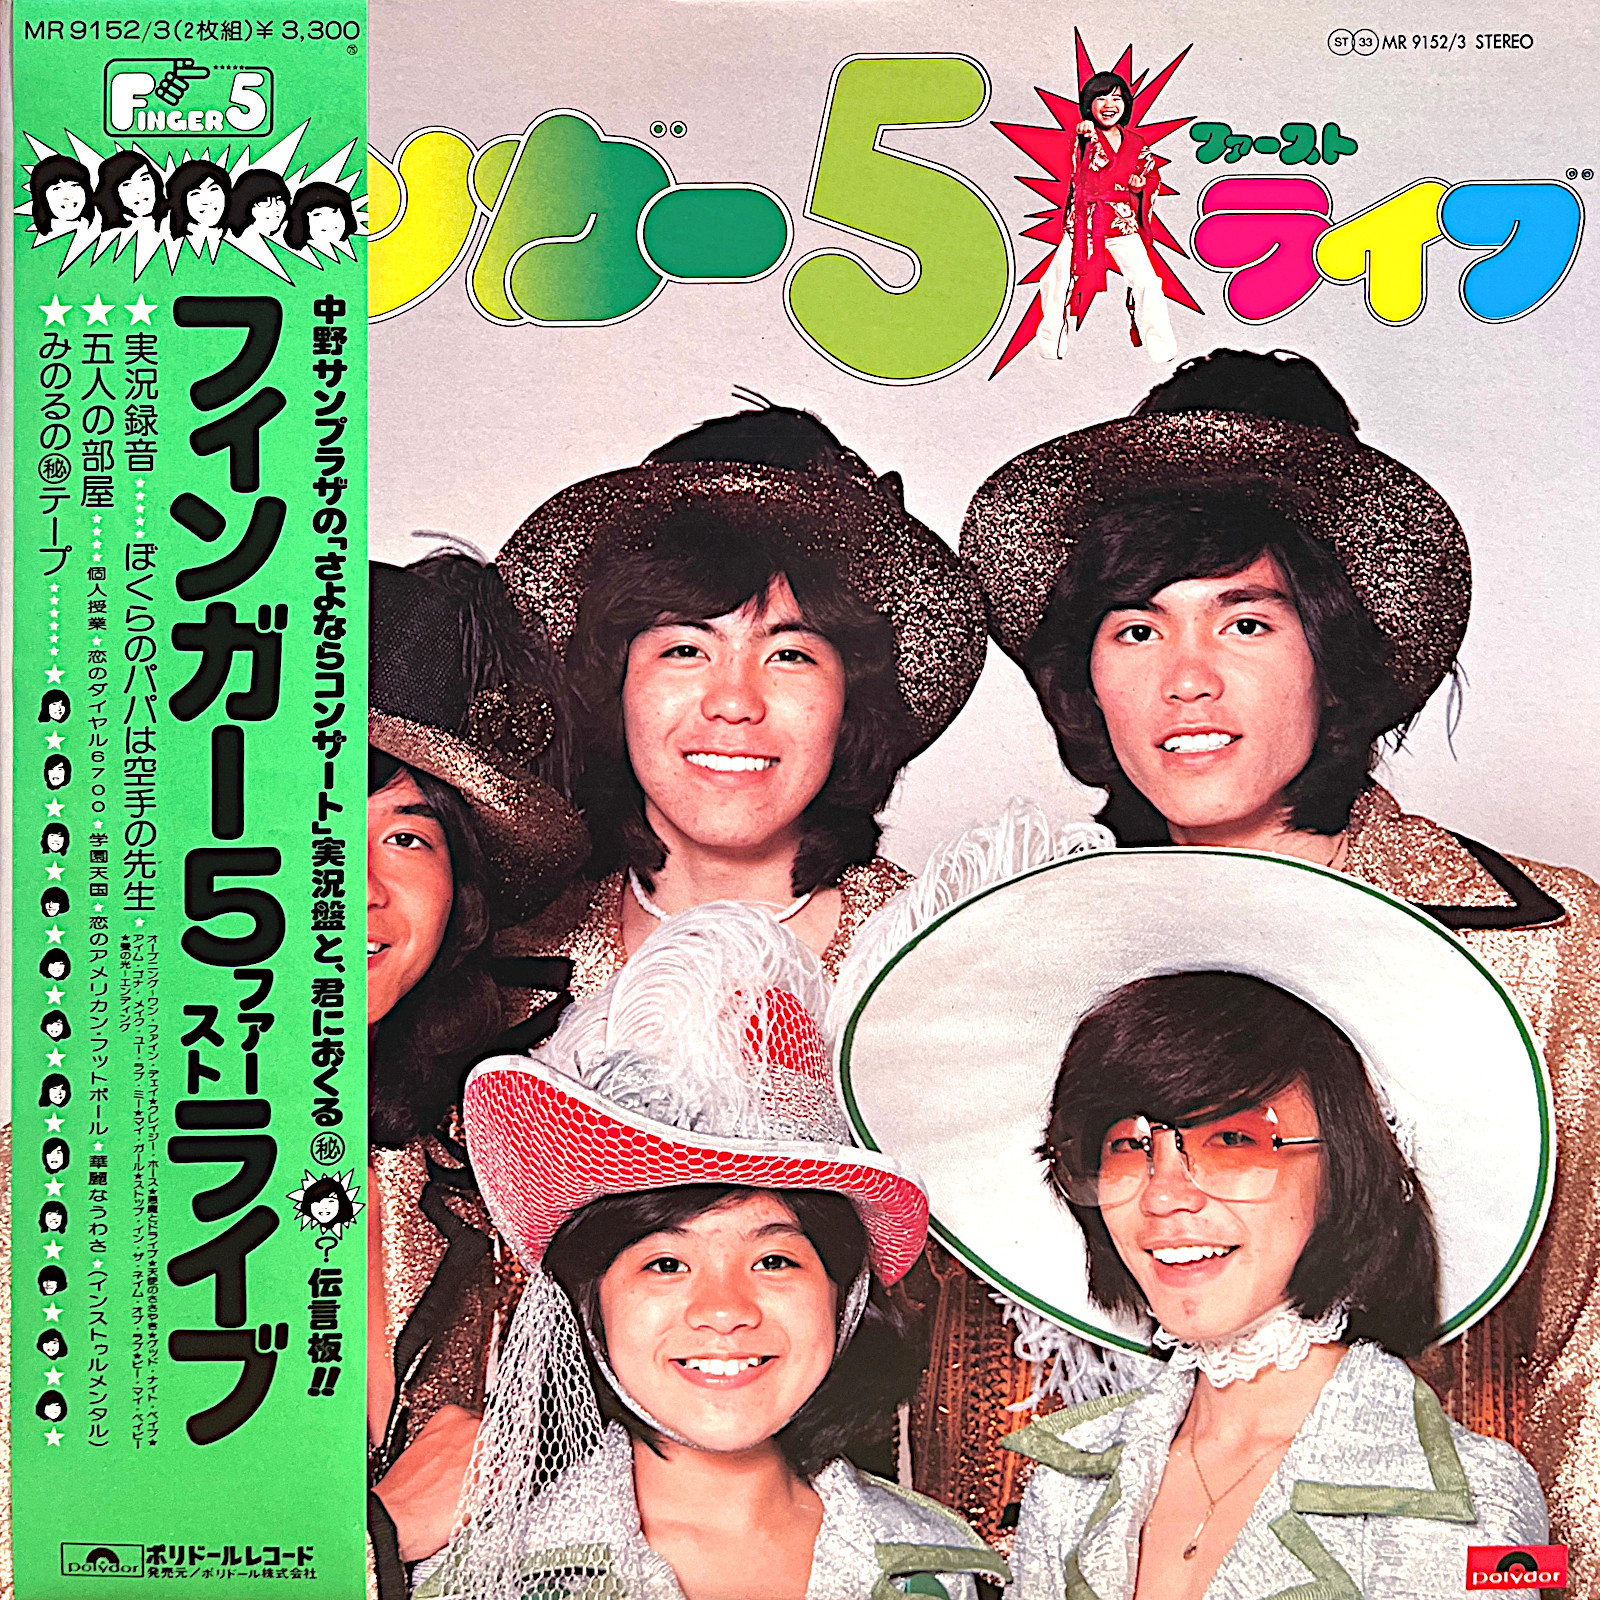 COCONUTS DISK WEBSTORE / フィンガー5 / ファーストライブ [Used LP]